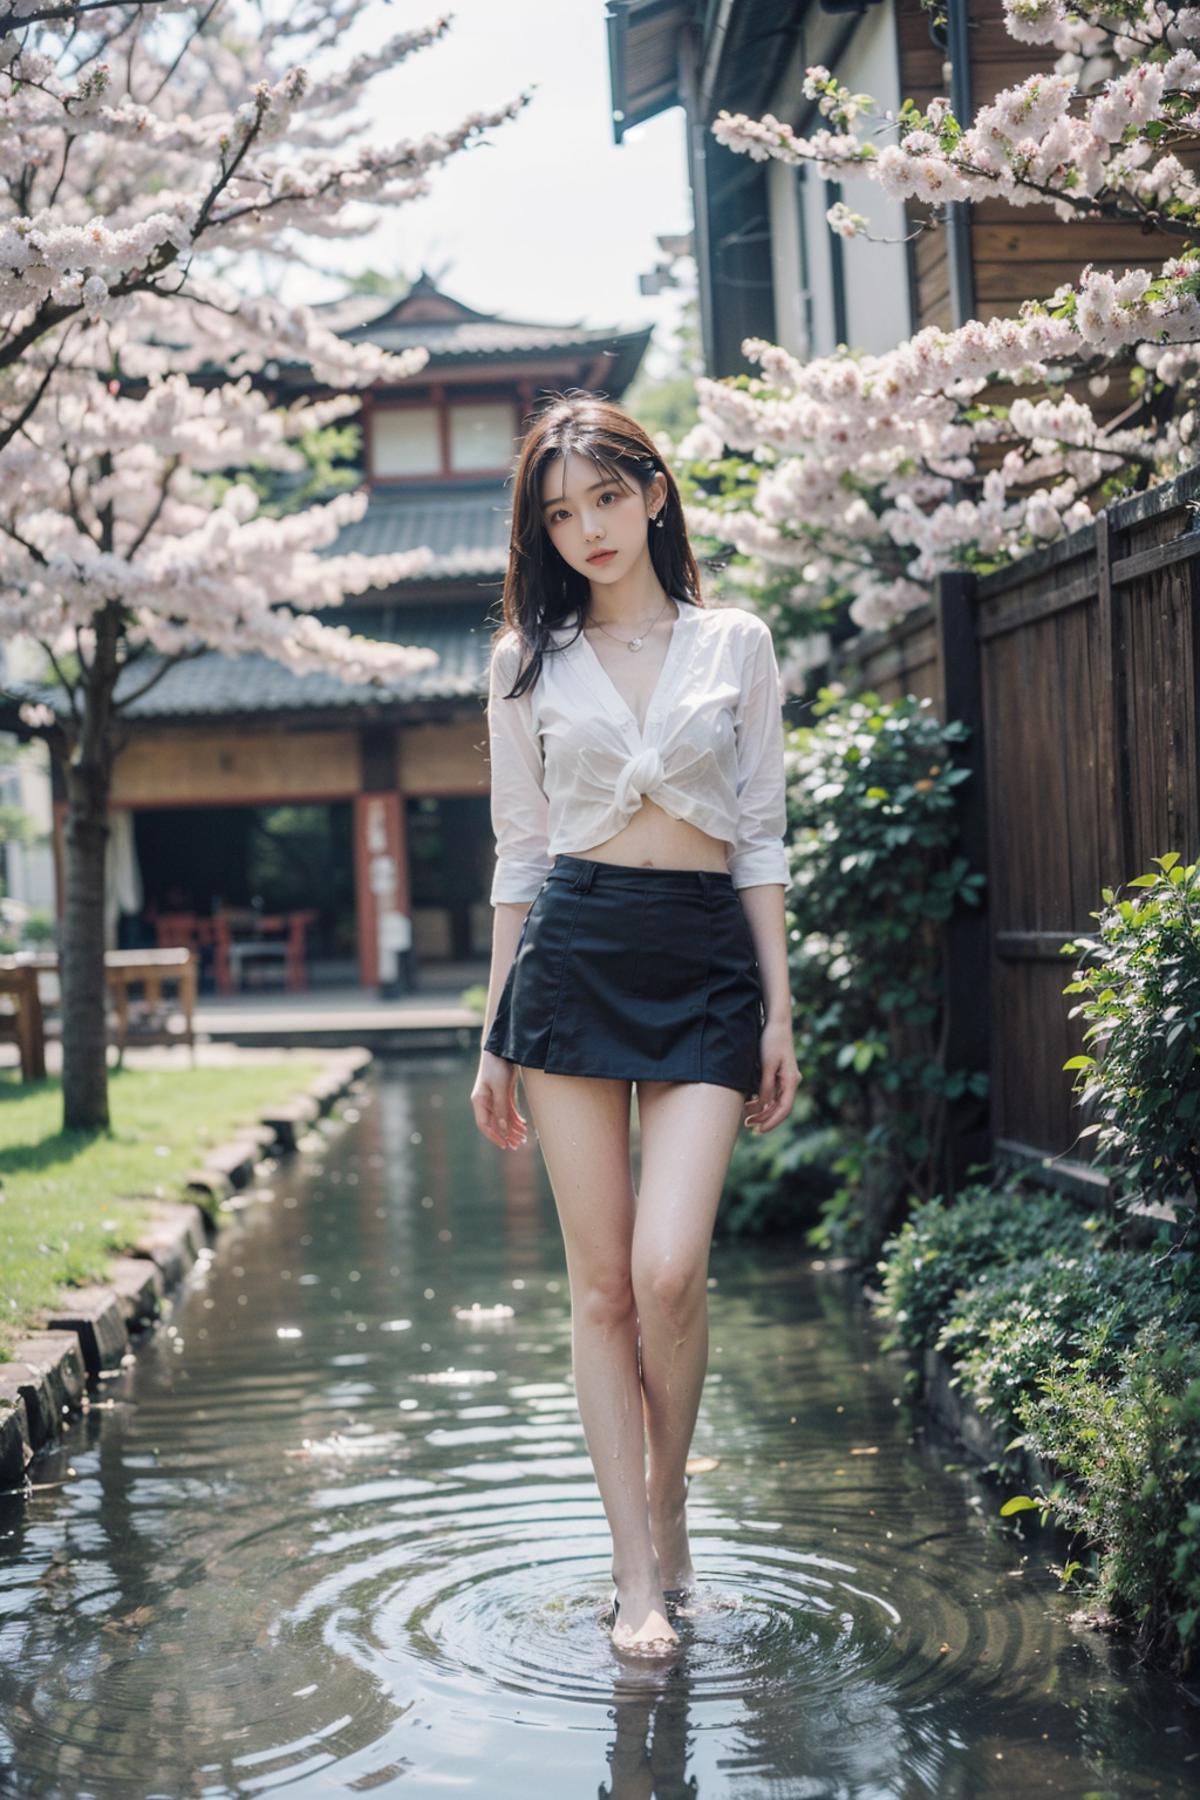 A young woman with a white shirt and black skirt walks through a pond.